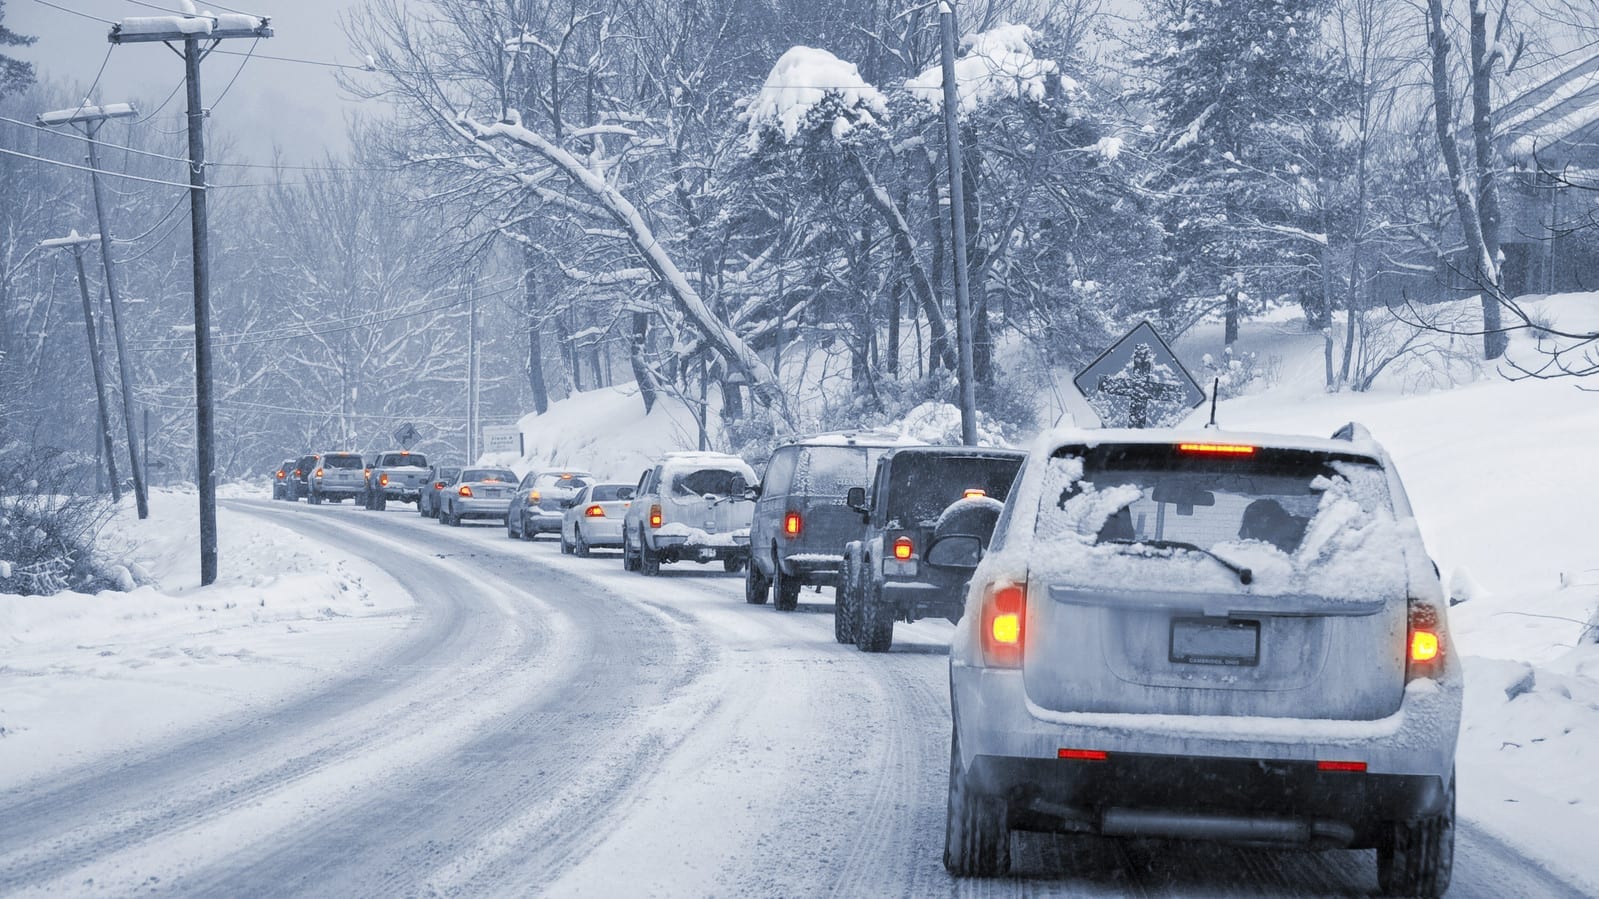 Stock photo of a line of traffic on a snowy road